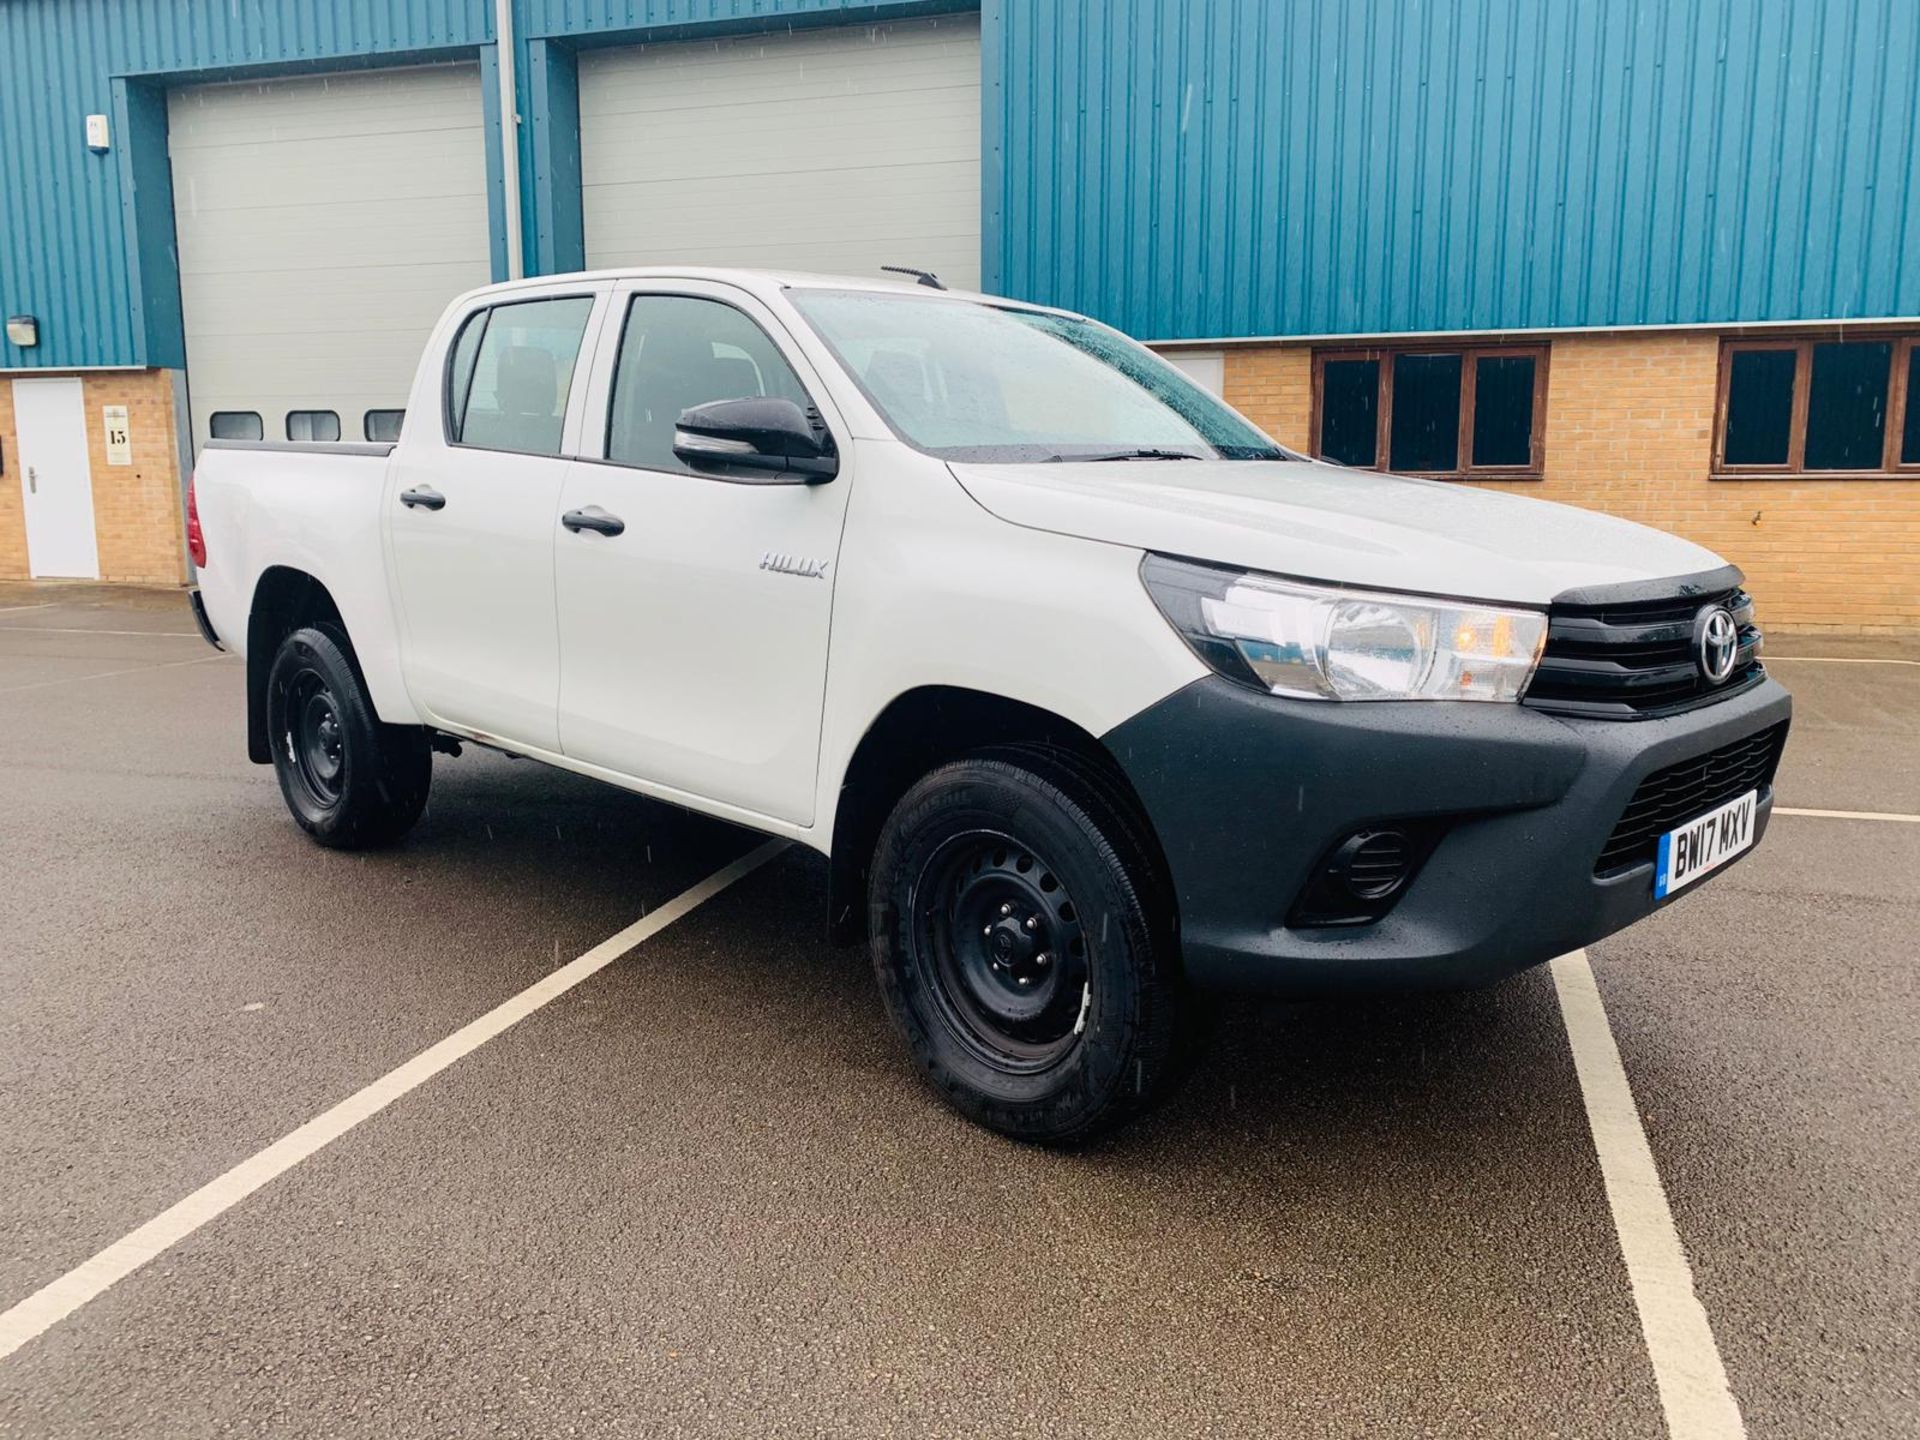 Toyota Hilux 2.4 D-4D Active 4WD Double Cab Pick Up - 2017 17 Reg - Air Con - Euro 6b - Tow Pack - Image 2 of 31